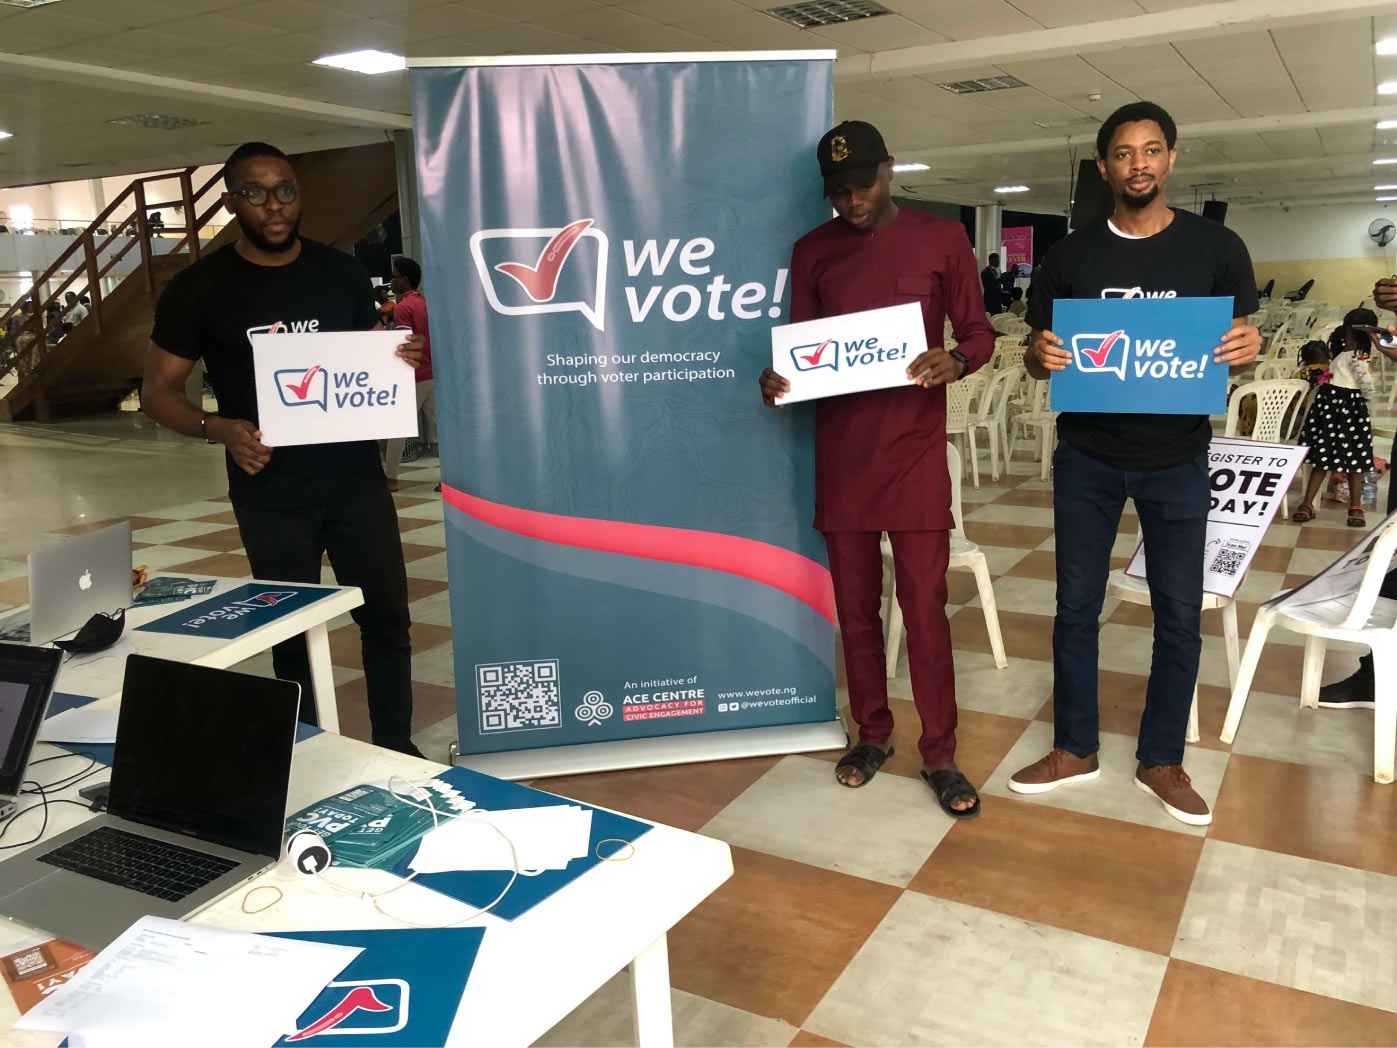 WeVote targets youth and first time voters at RCCG with voter education, awareness and registration